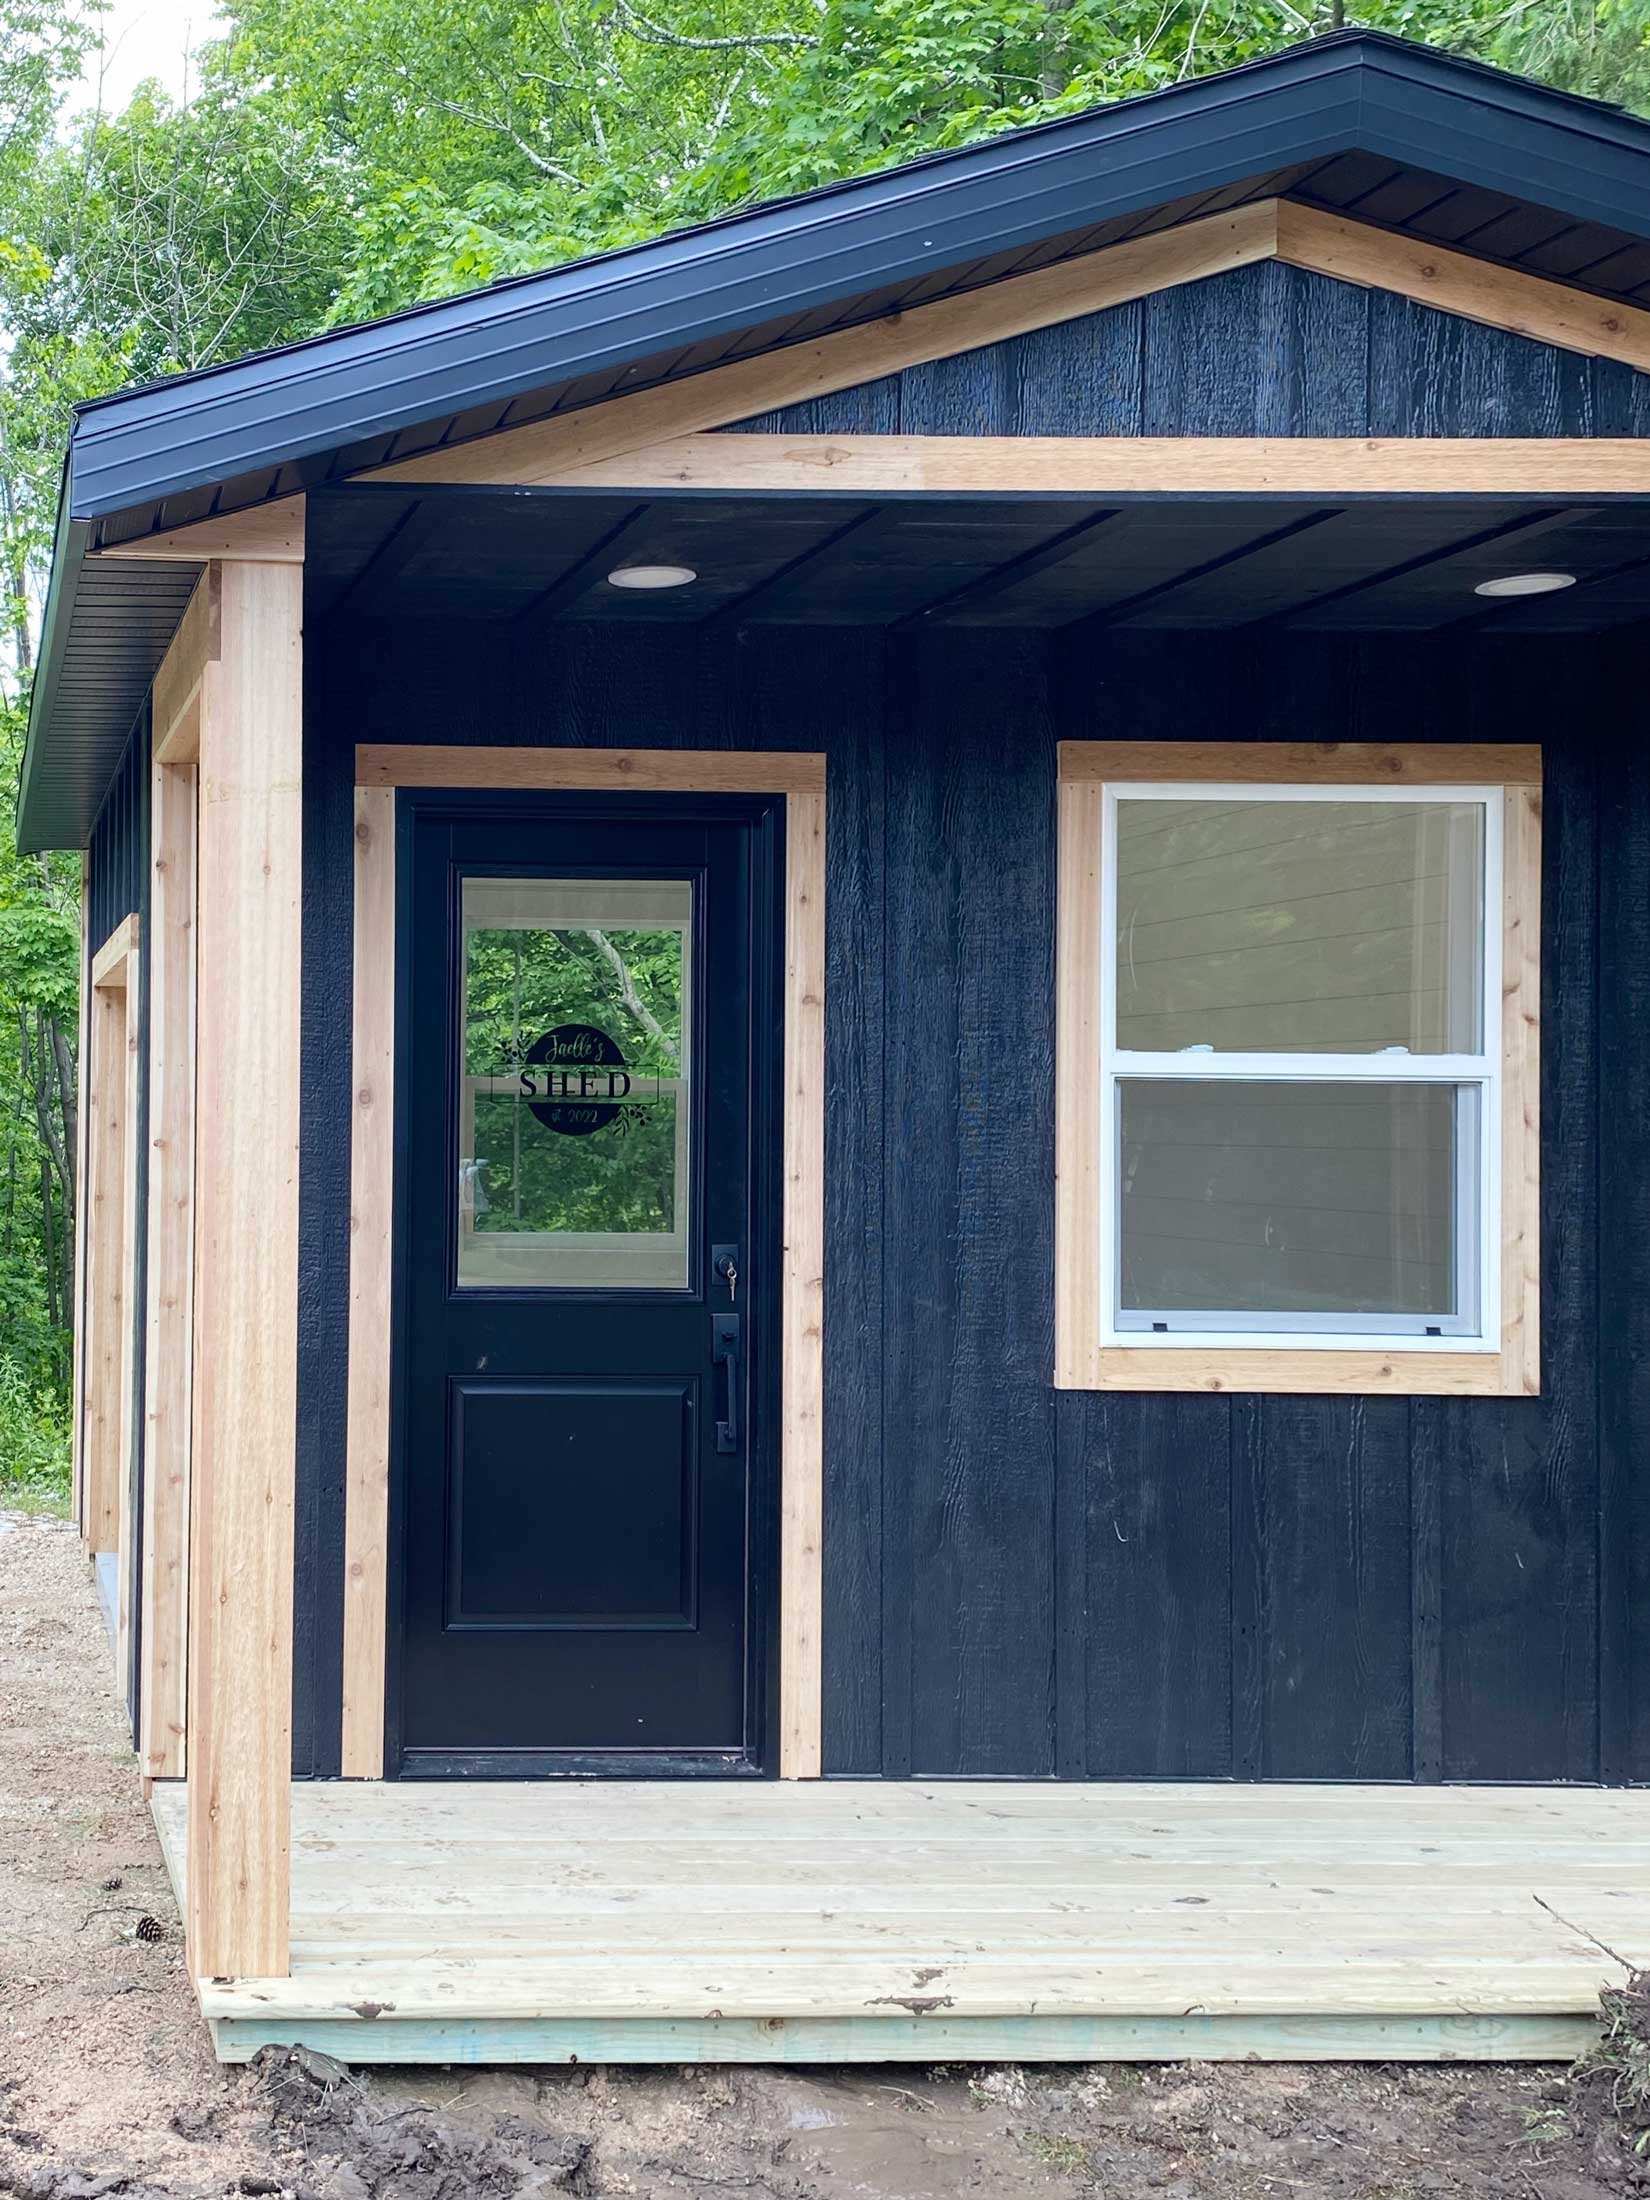 Make-A-Wish modern farmhouse She-Shed built by C.D. Smith Construction with Jaelle and family standing in front.